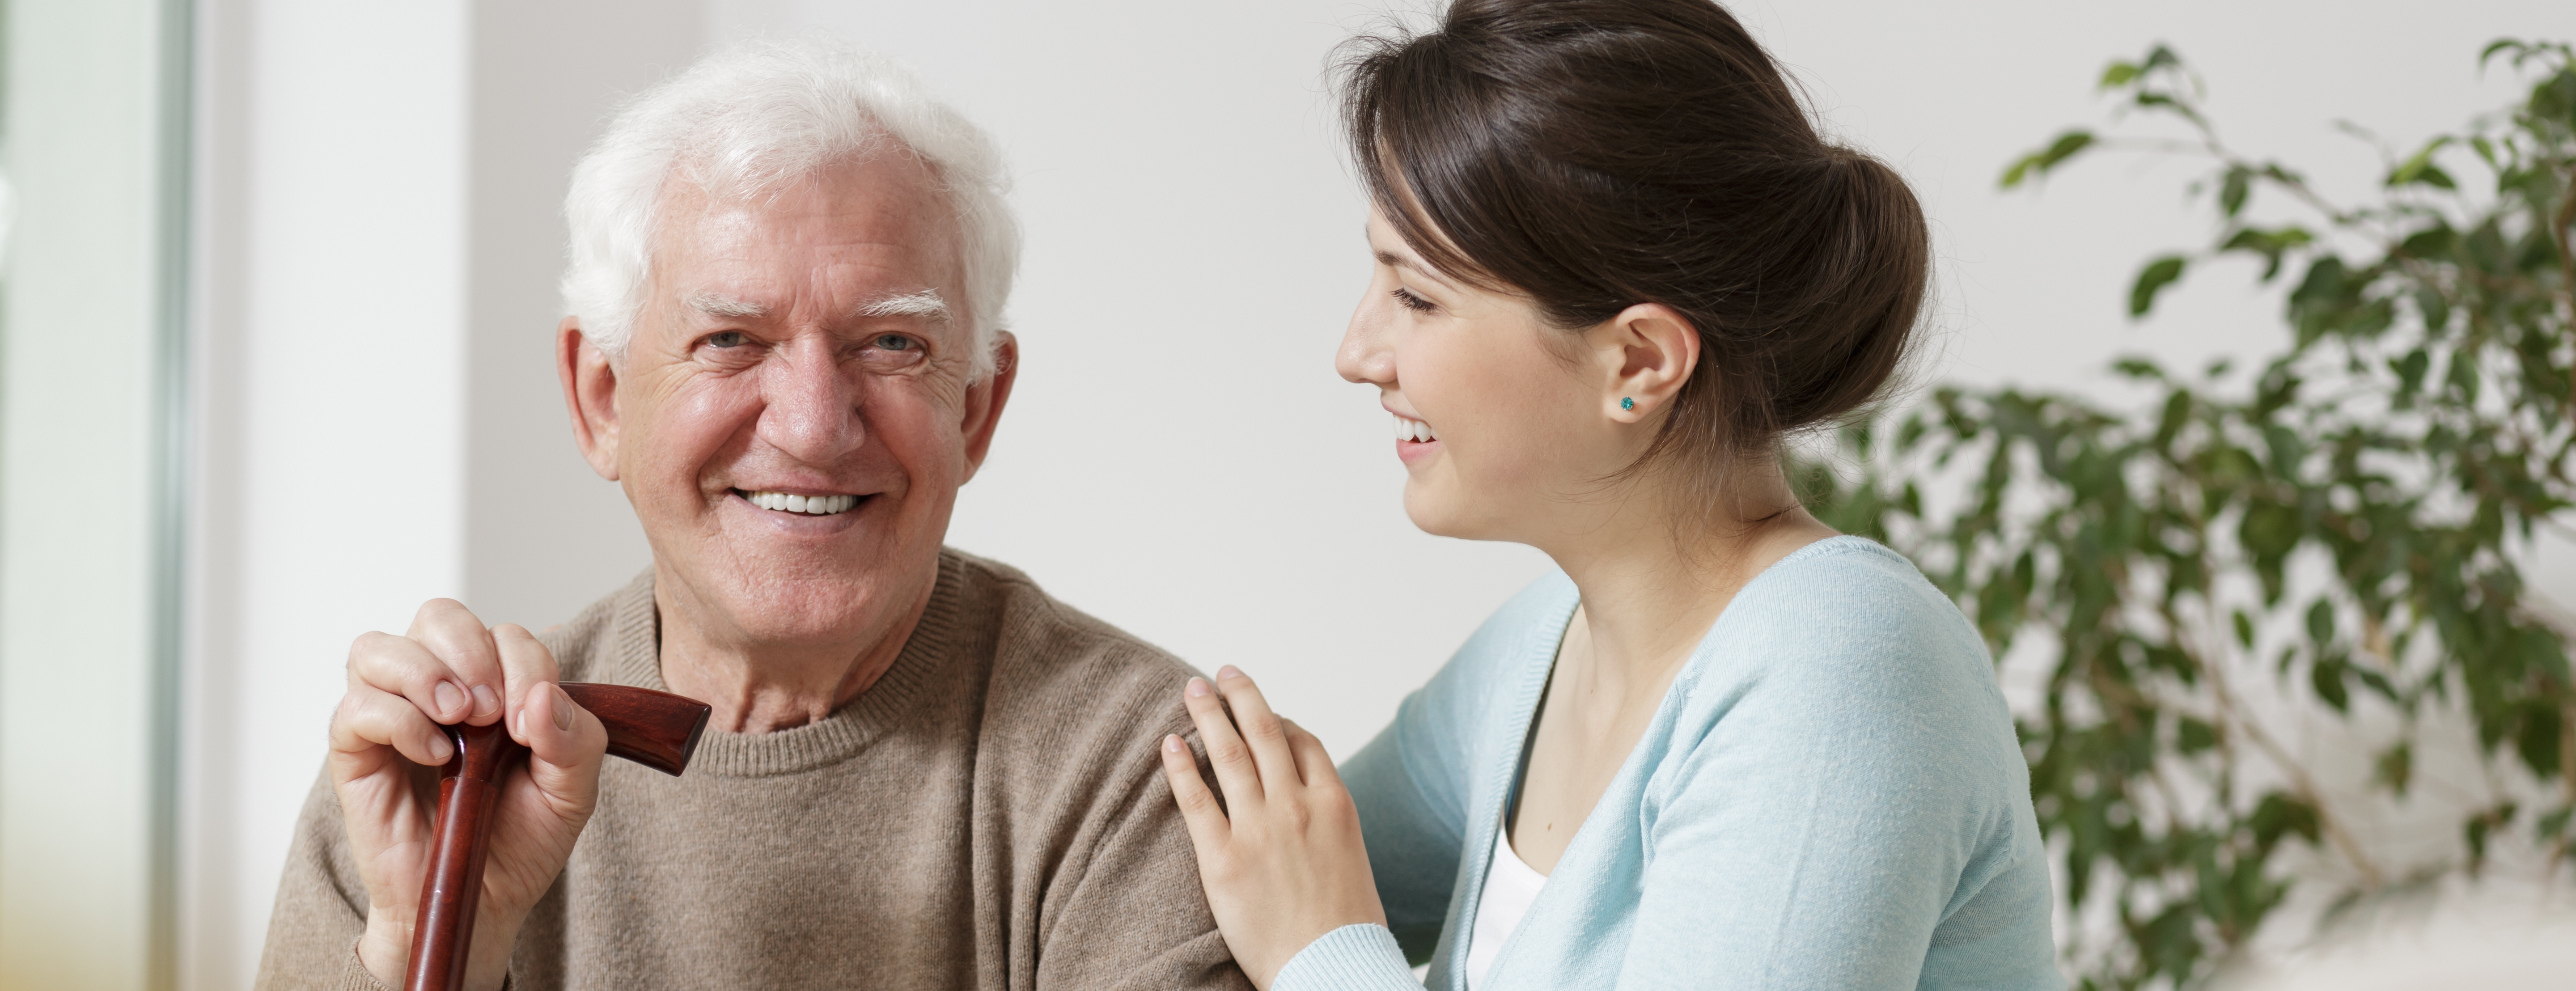 How to Make The Home Safer and Find the Right Care for a Loved One with Parkinson’s